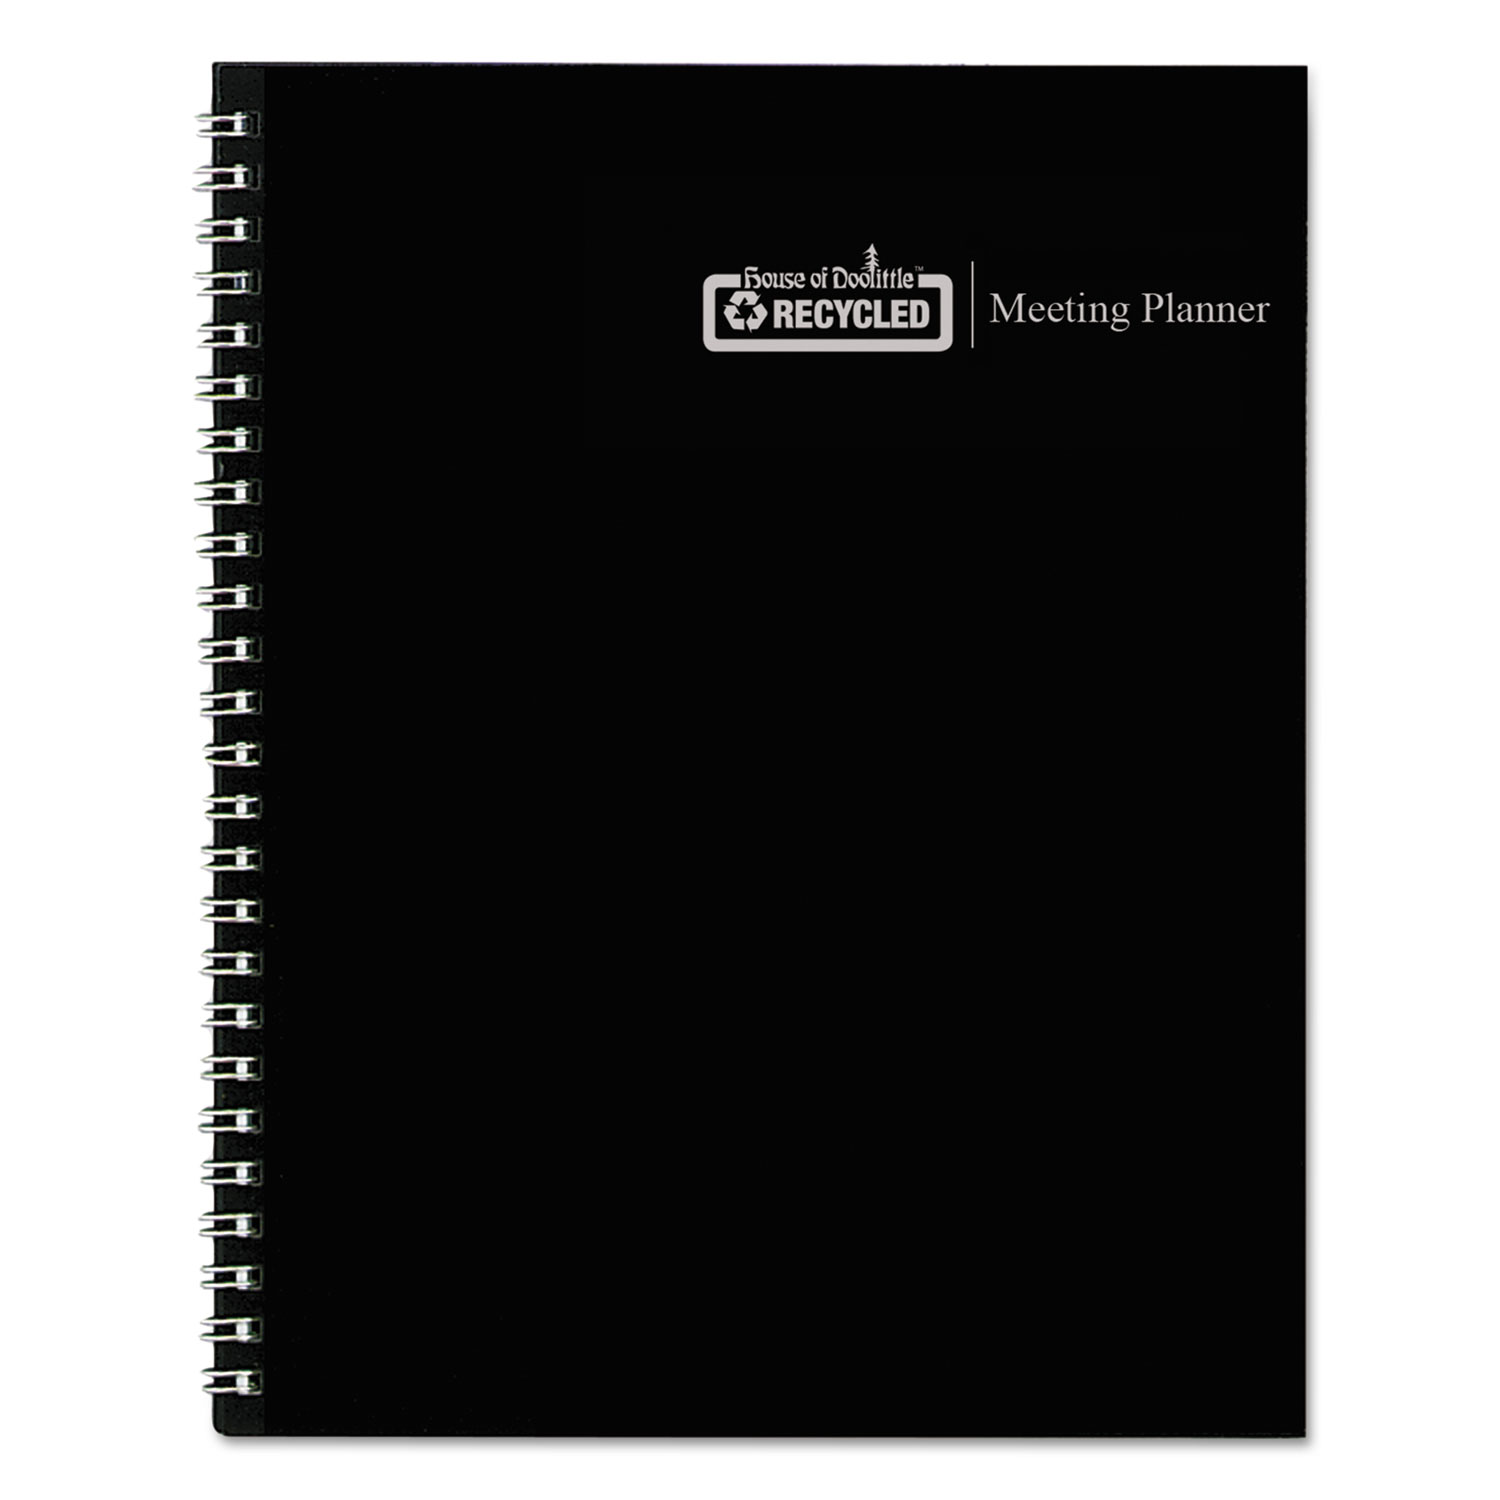 Recycled Meeting Note Planner, 8 1/2 x 11, Black/Blue, 2018